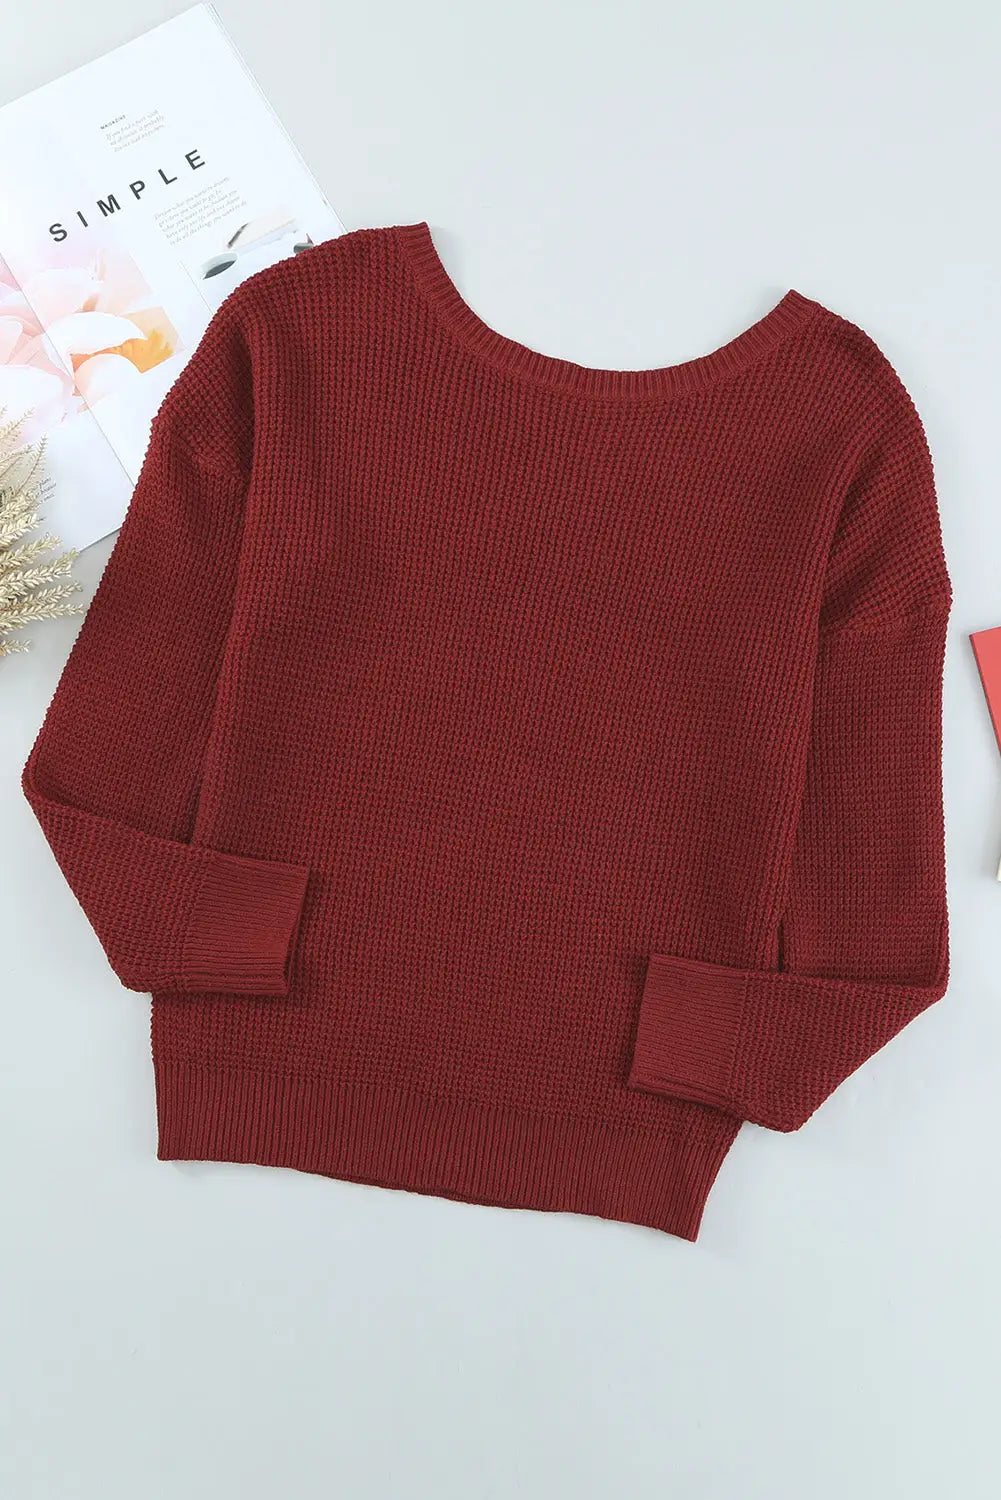 Gray cross back hollow-out sweater - sweaters & cardigans